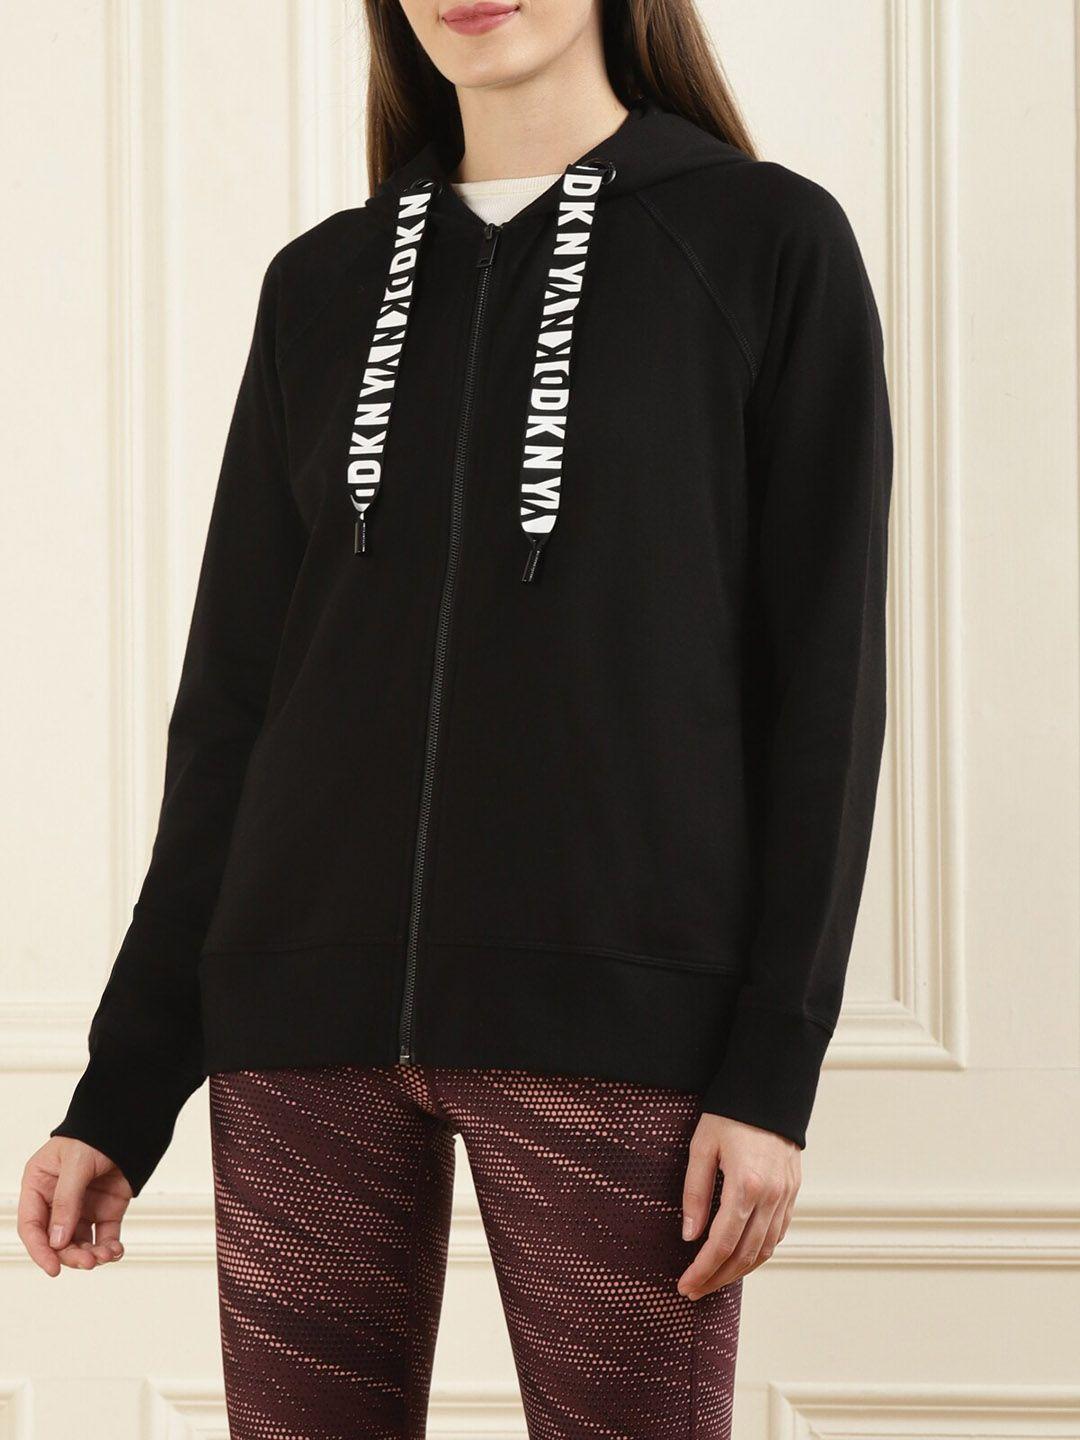 dkny typography printed longline tailored jacket